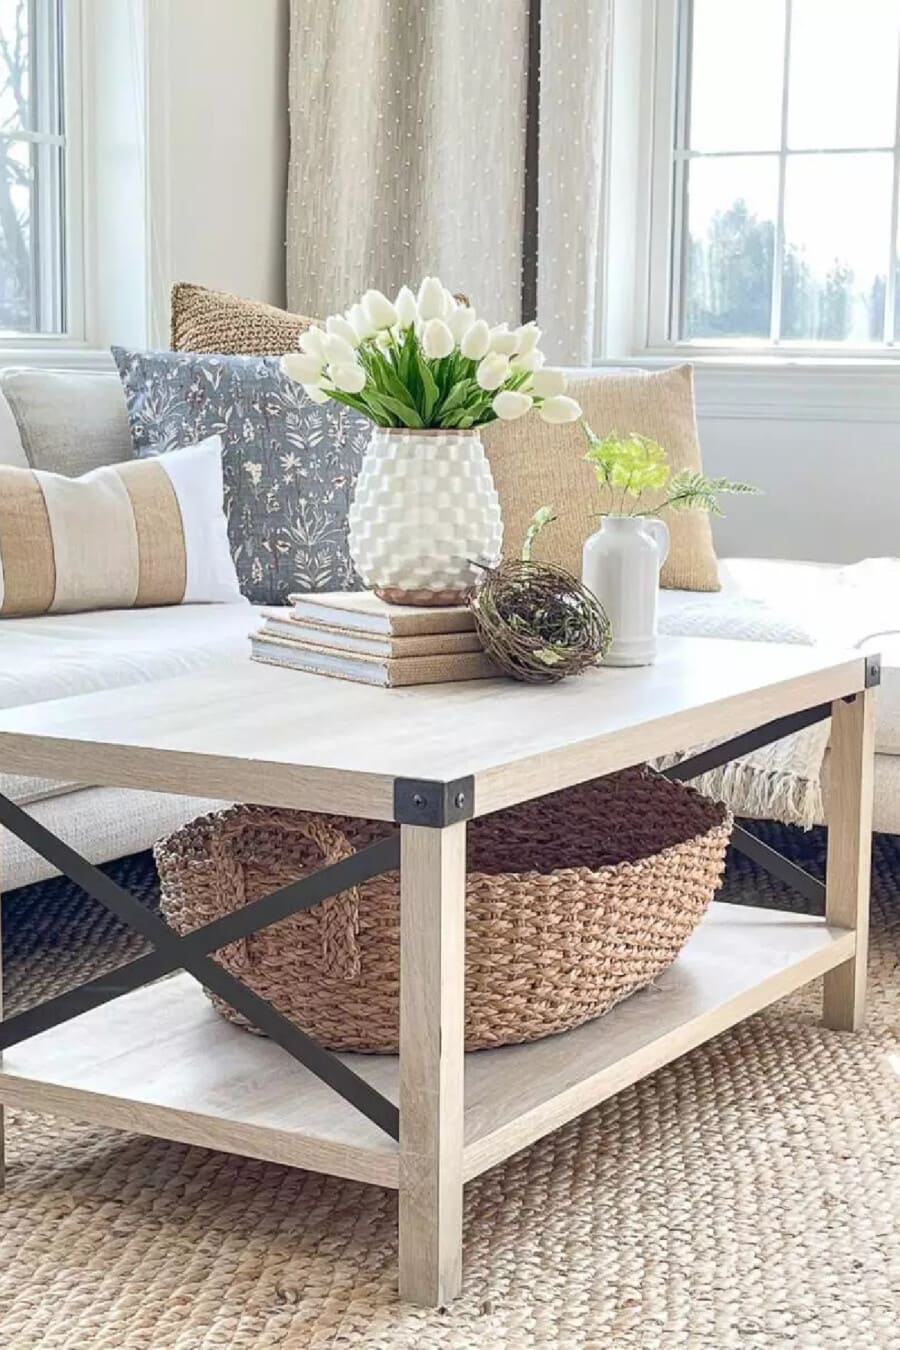 SPRING DECORATING IDEAS AND HOME TOUR